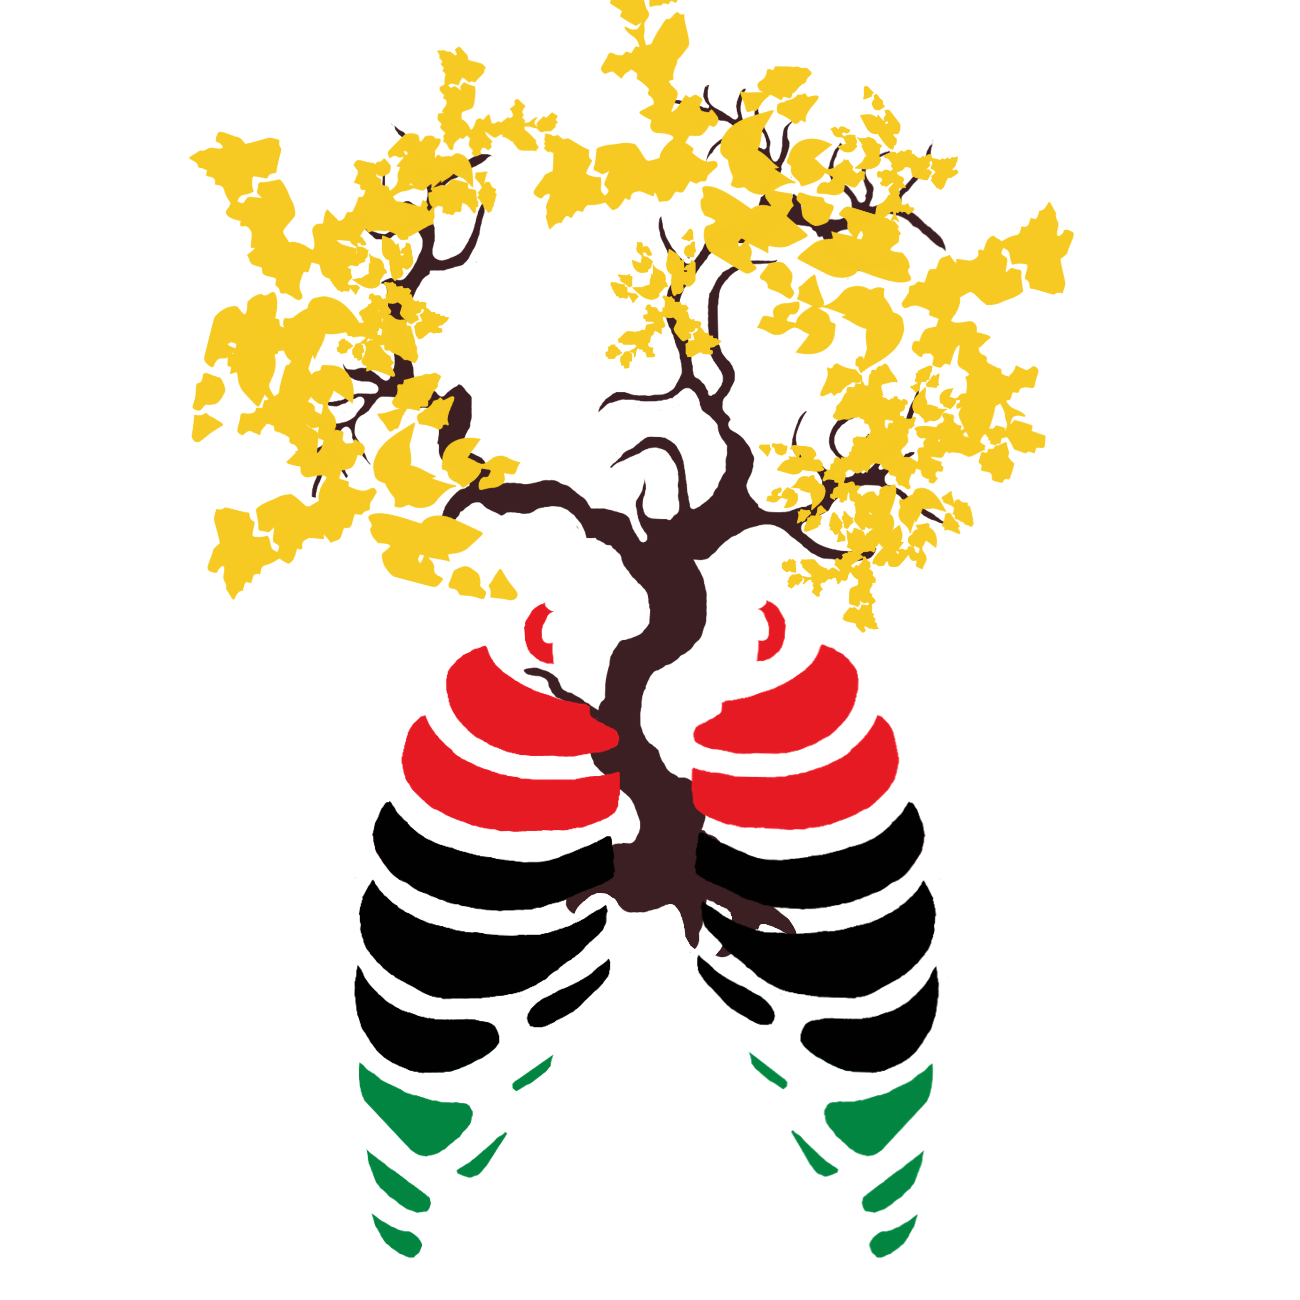 golden tree growing out of red black and green ribs